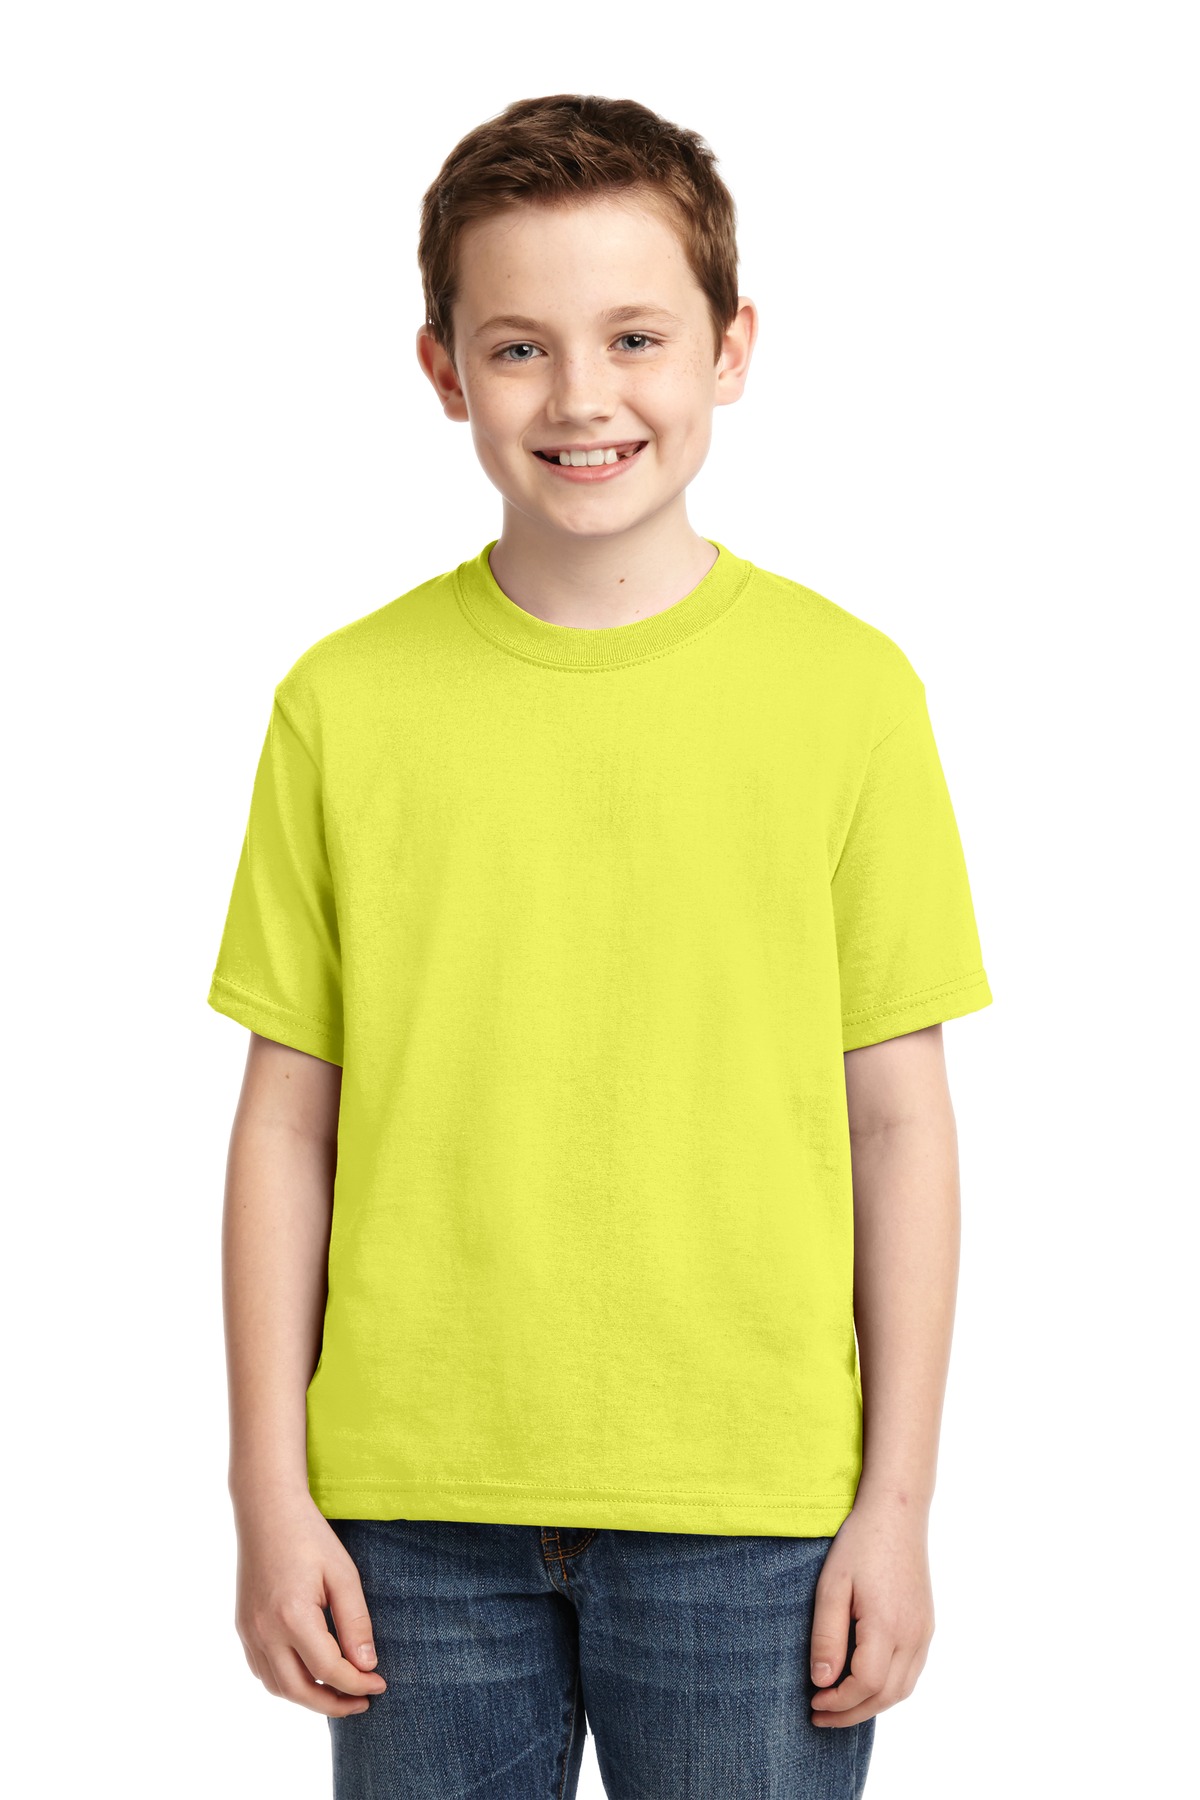 JERZEES  - Youth Dri-Power  Active 50-50 Cotton Poly T-Shirt. 29B